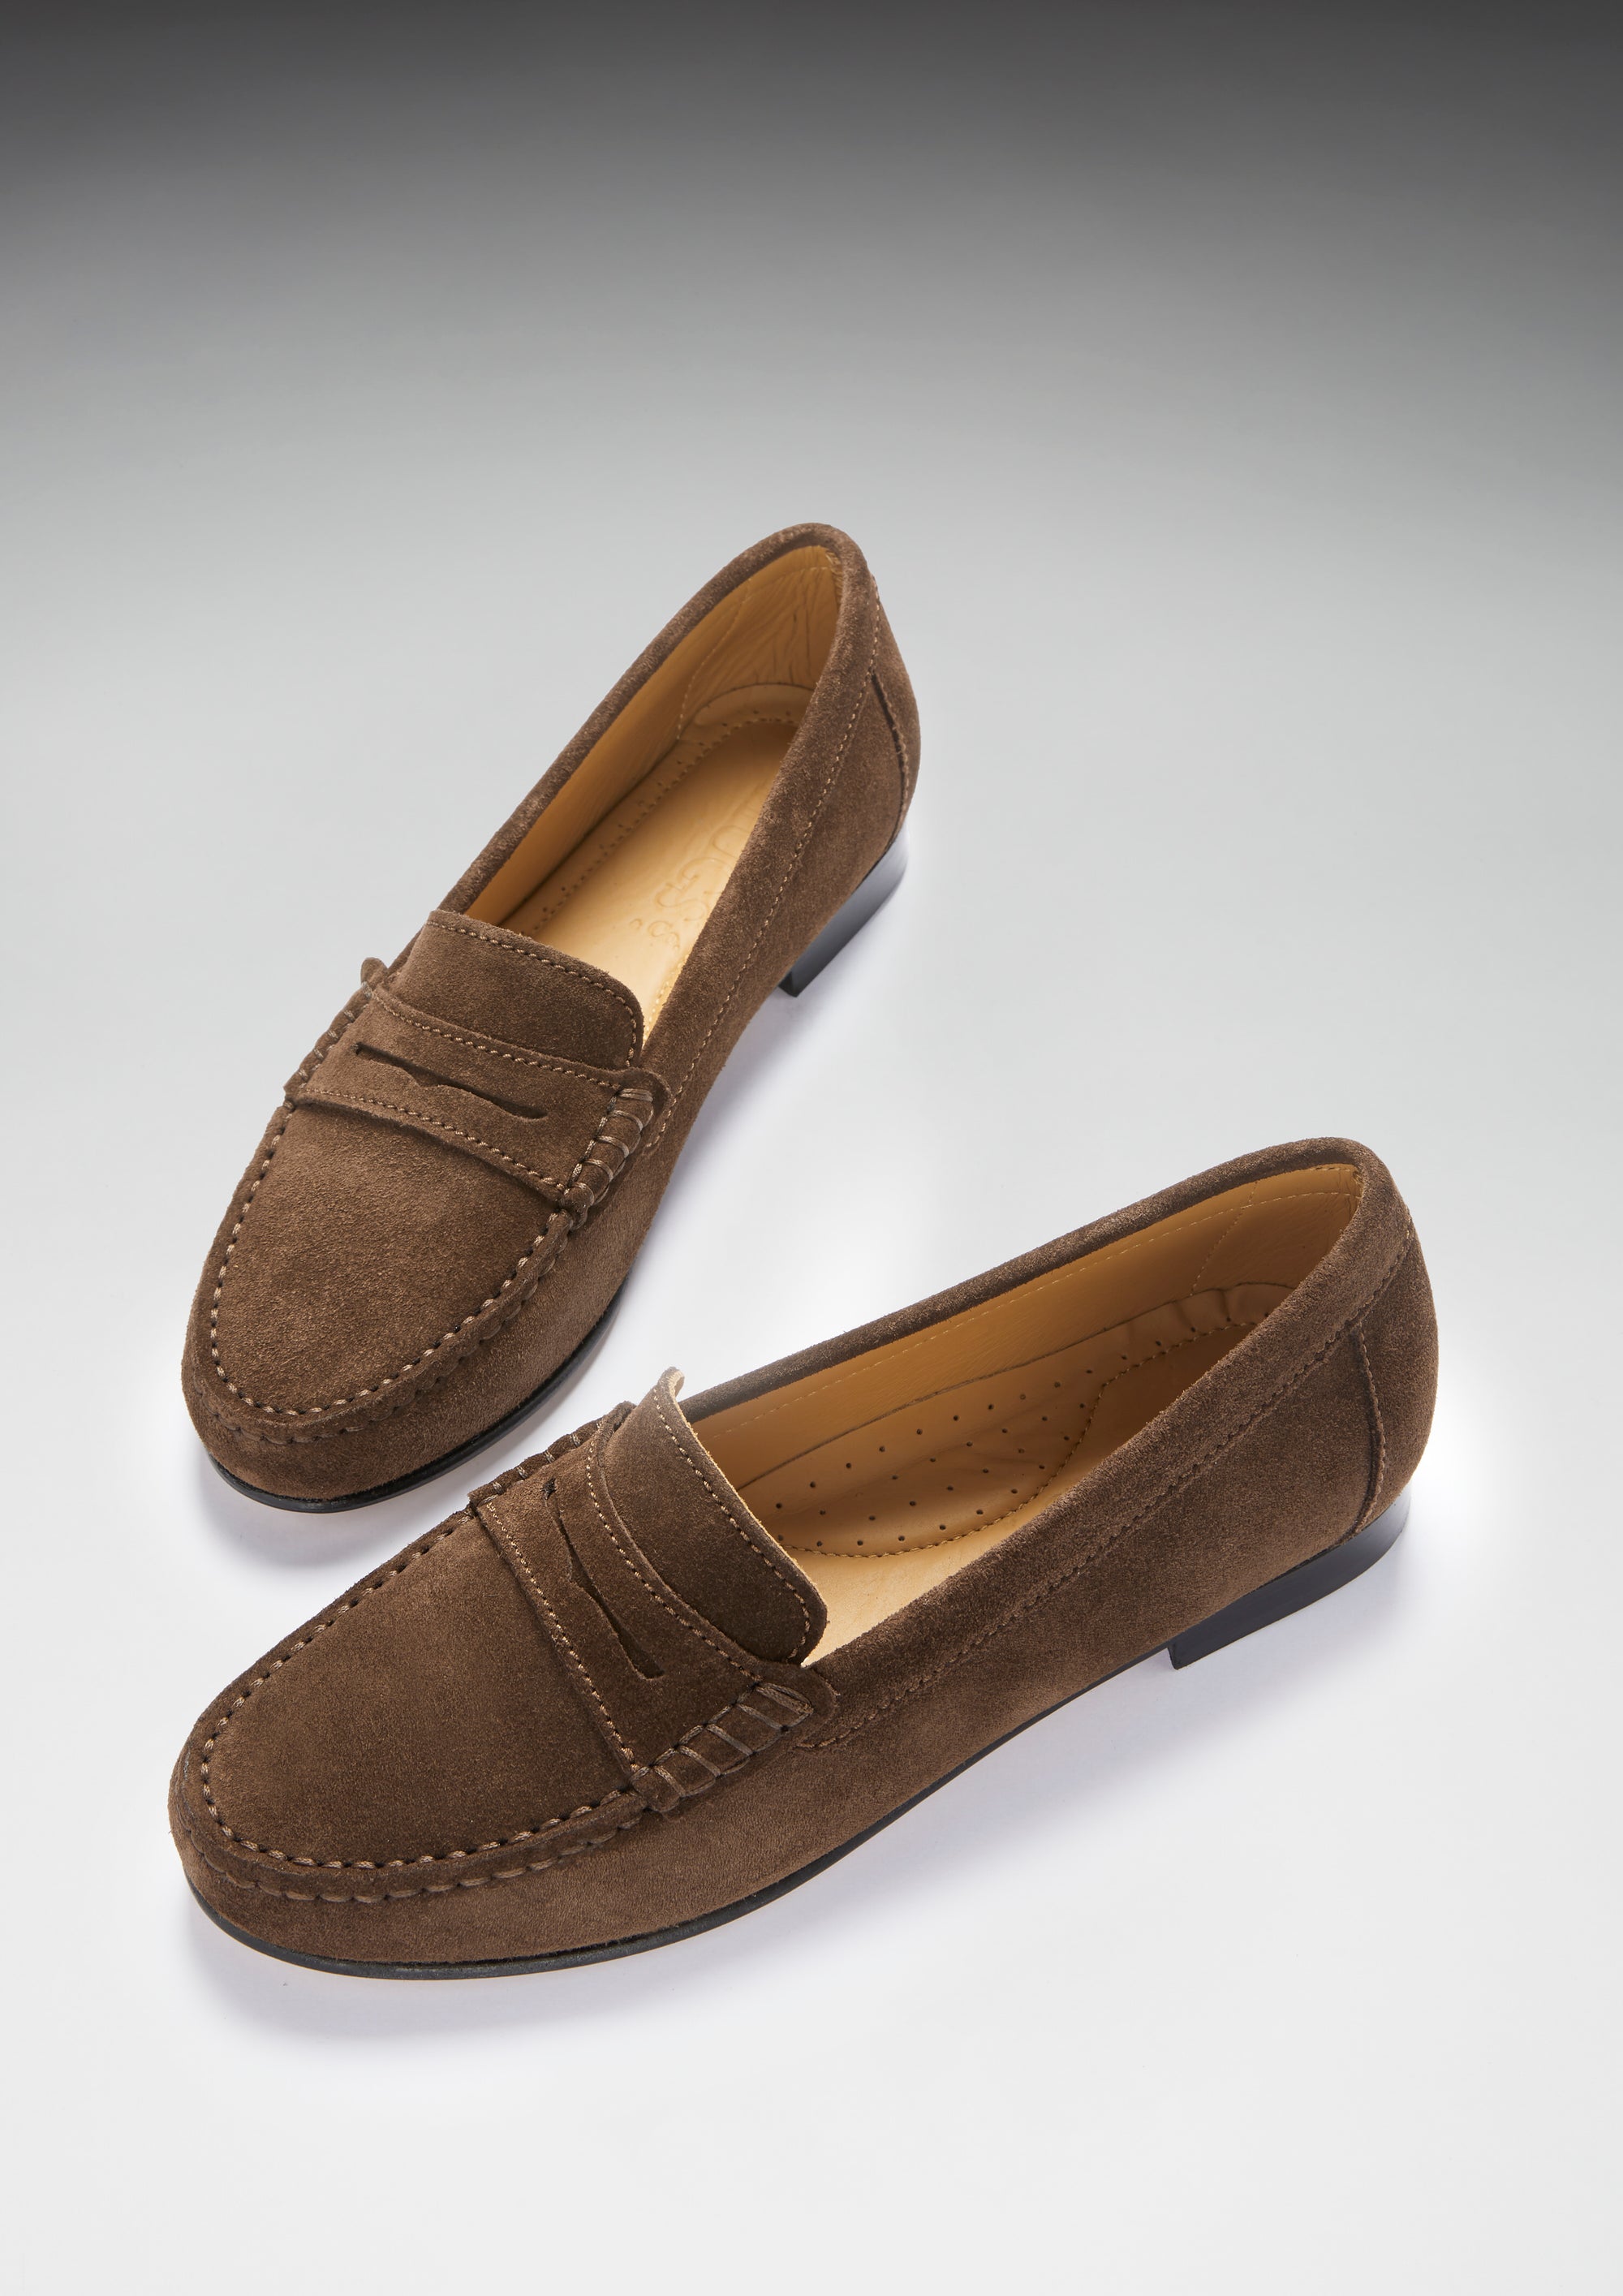 Women's Penny Loafers Leather Sole, brown suede - Hugs & Co.